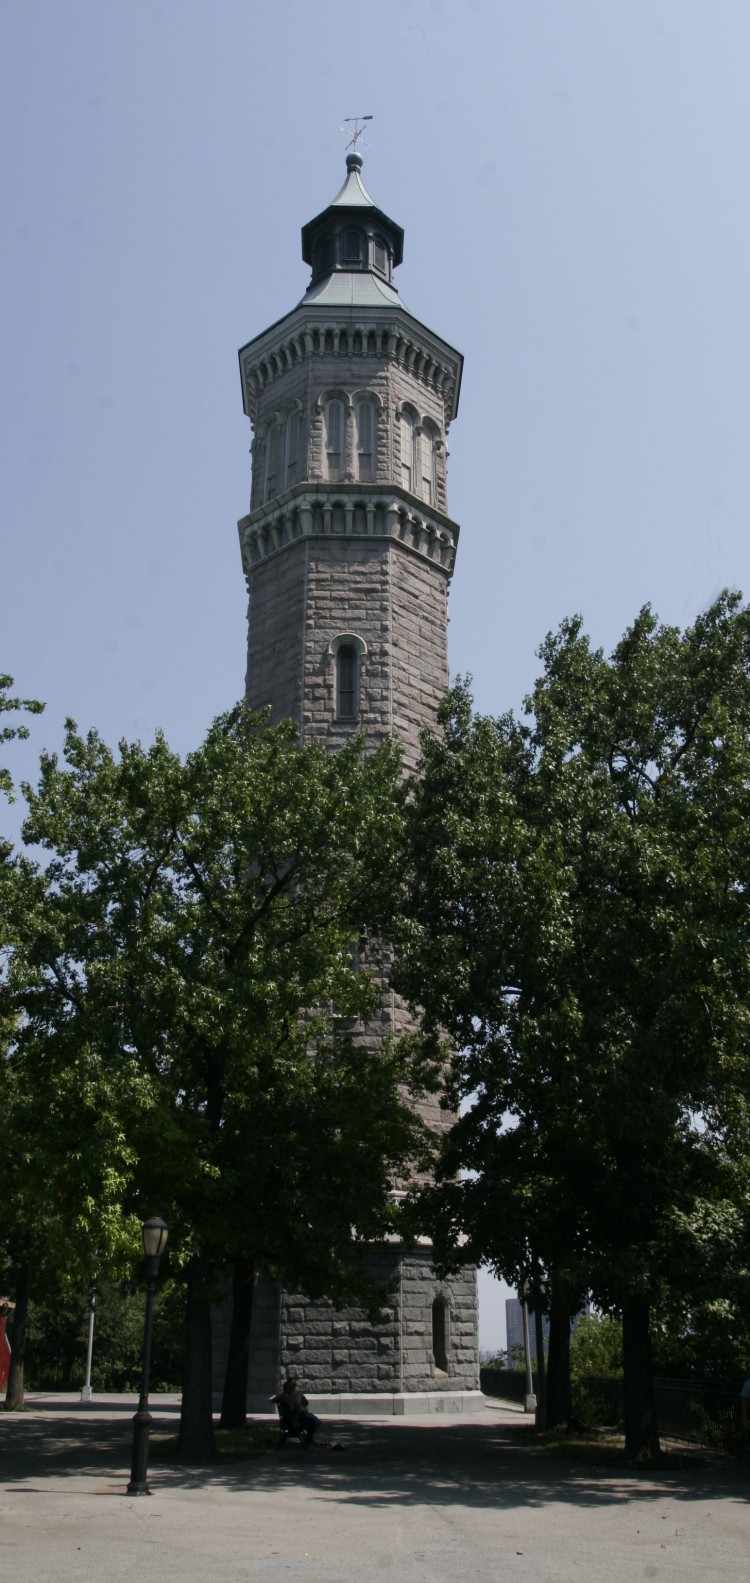 PICTURESQUE: The Highbridge Water tower was built in 1872 to help bring water to residents of northern Manhattan.   (Tim McDevitt/The Epoch Times)